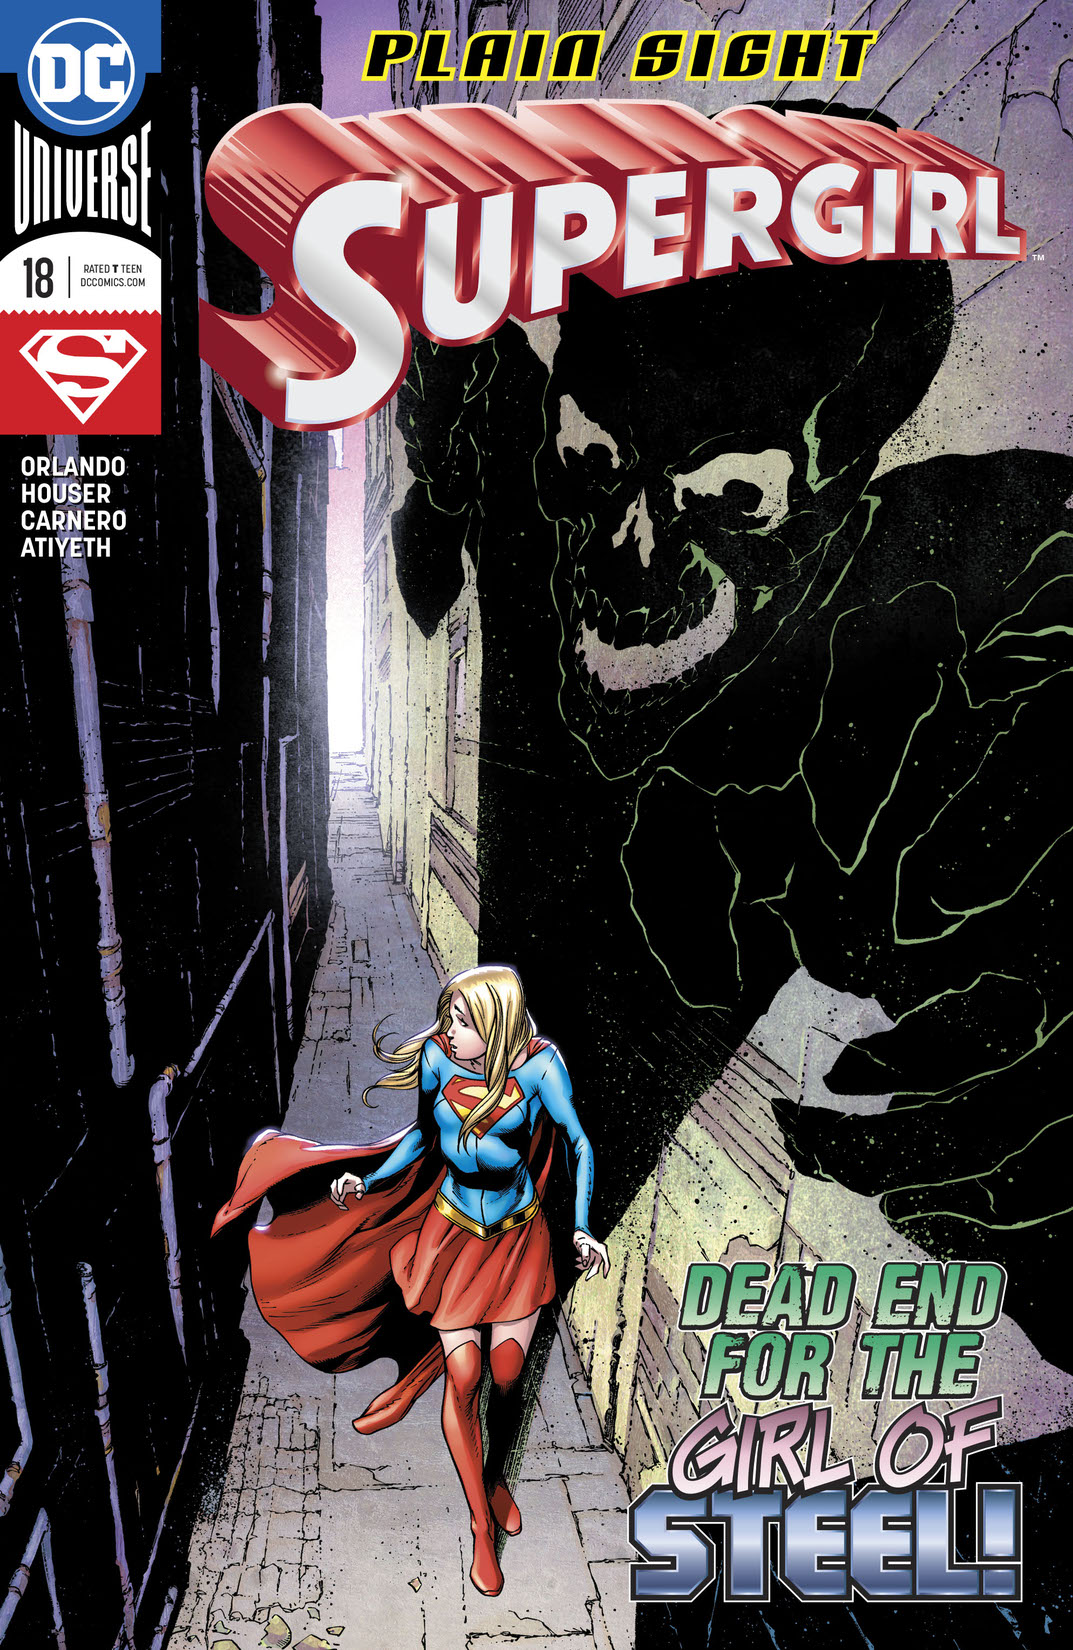 Supergirl (2016-) #18 preview images